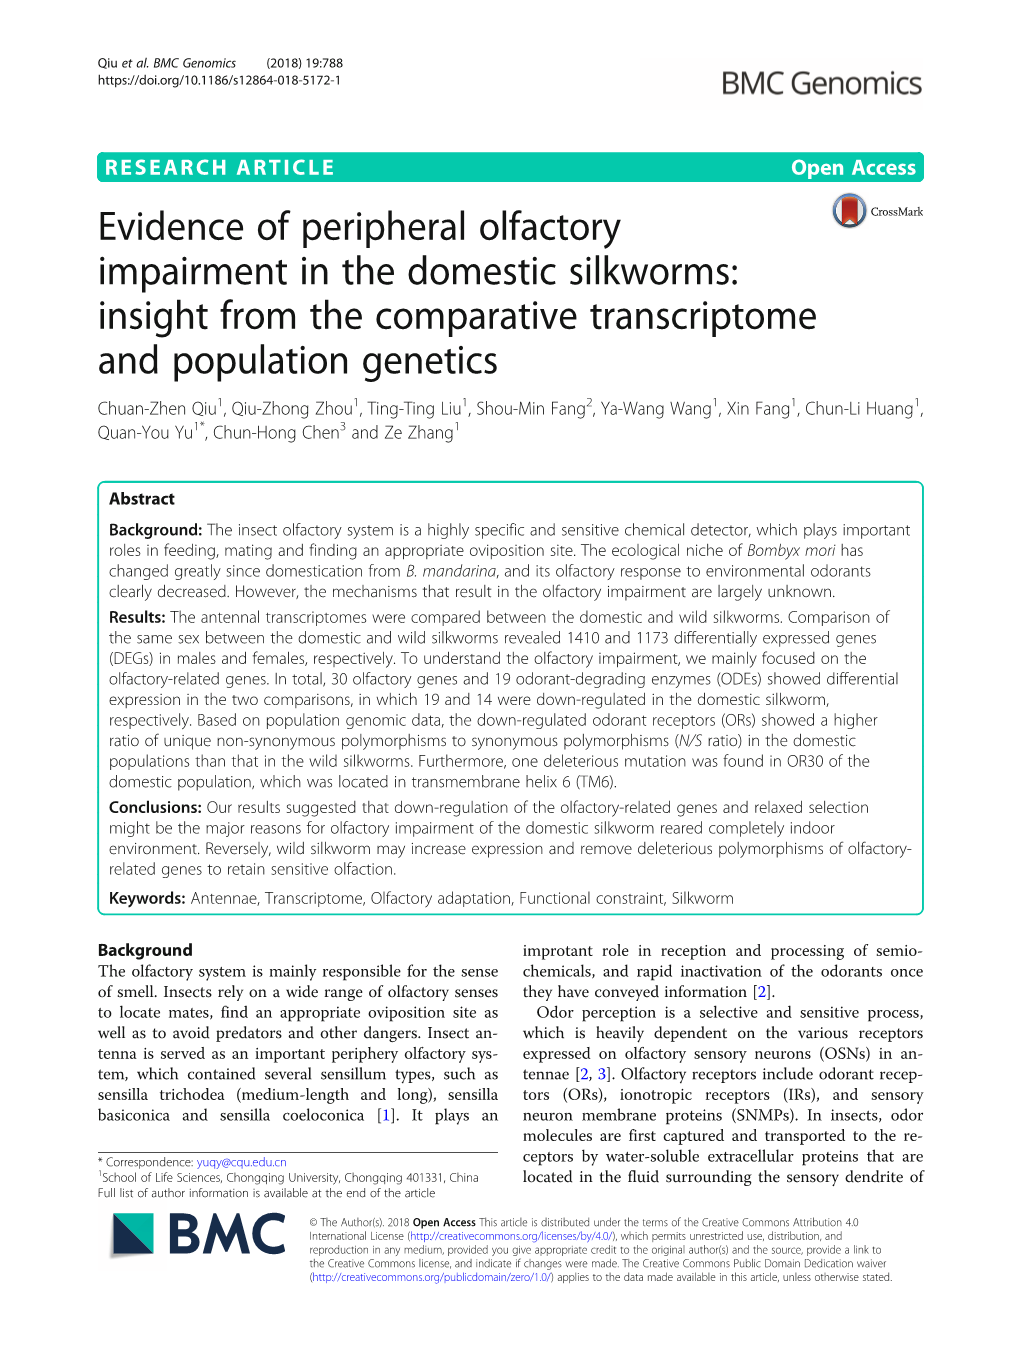 Evidence of Peripheral Olfactory Impairment in the Domestic Silkworms: Insight from the Comparative Transcriptome and Population